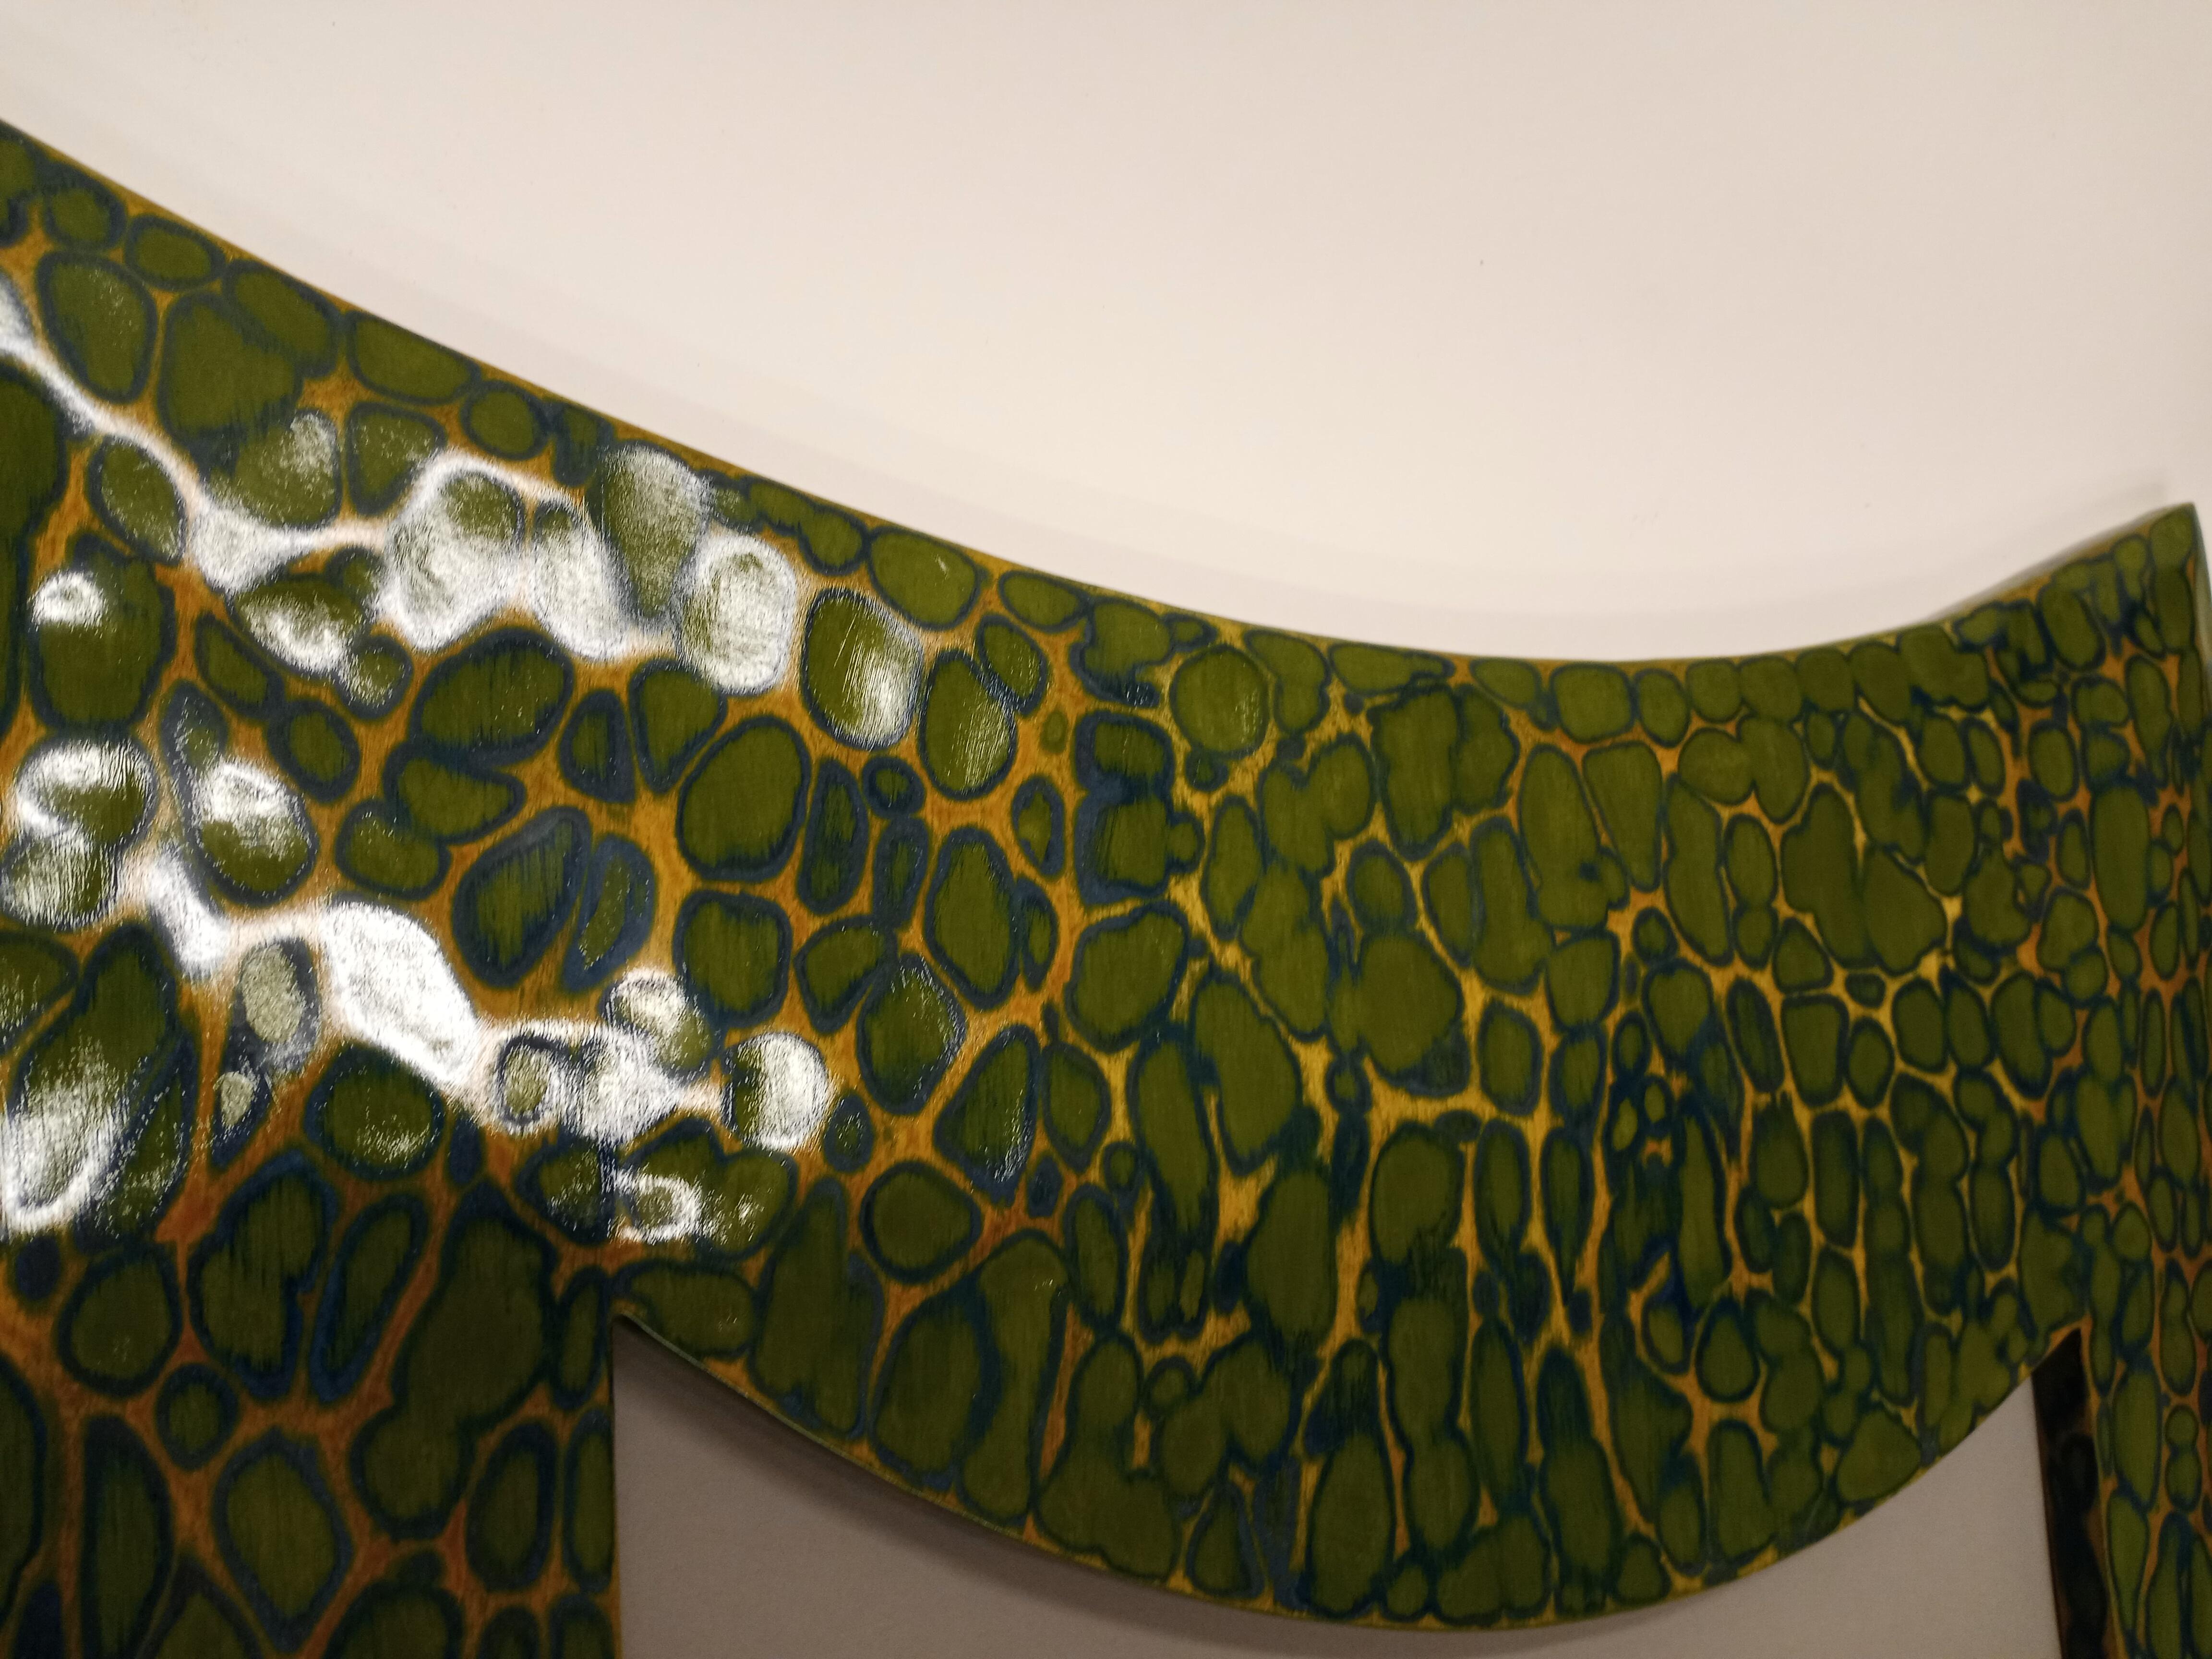 Green and Blue Curved Mirror Series is part of a on going series of work that I use to explore surface texture.  77